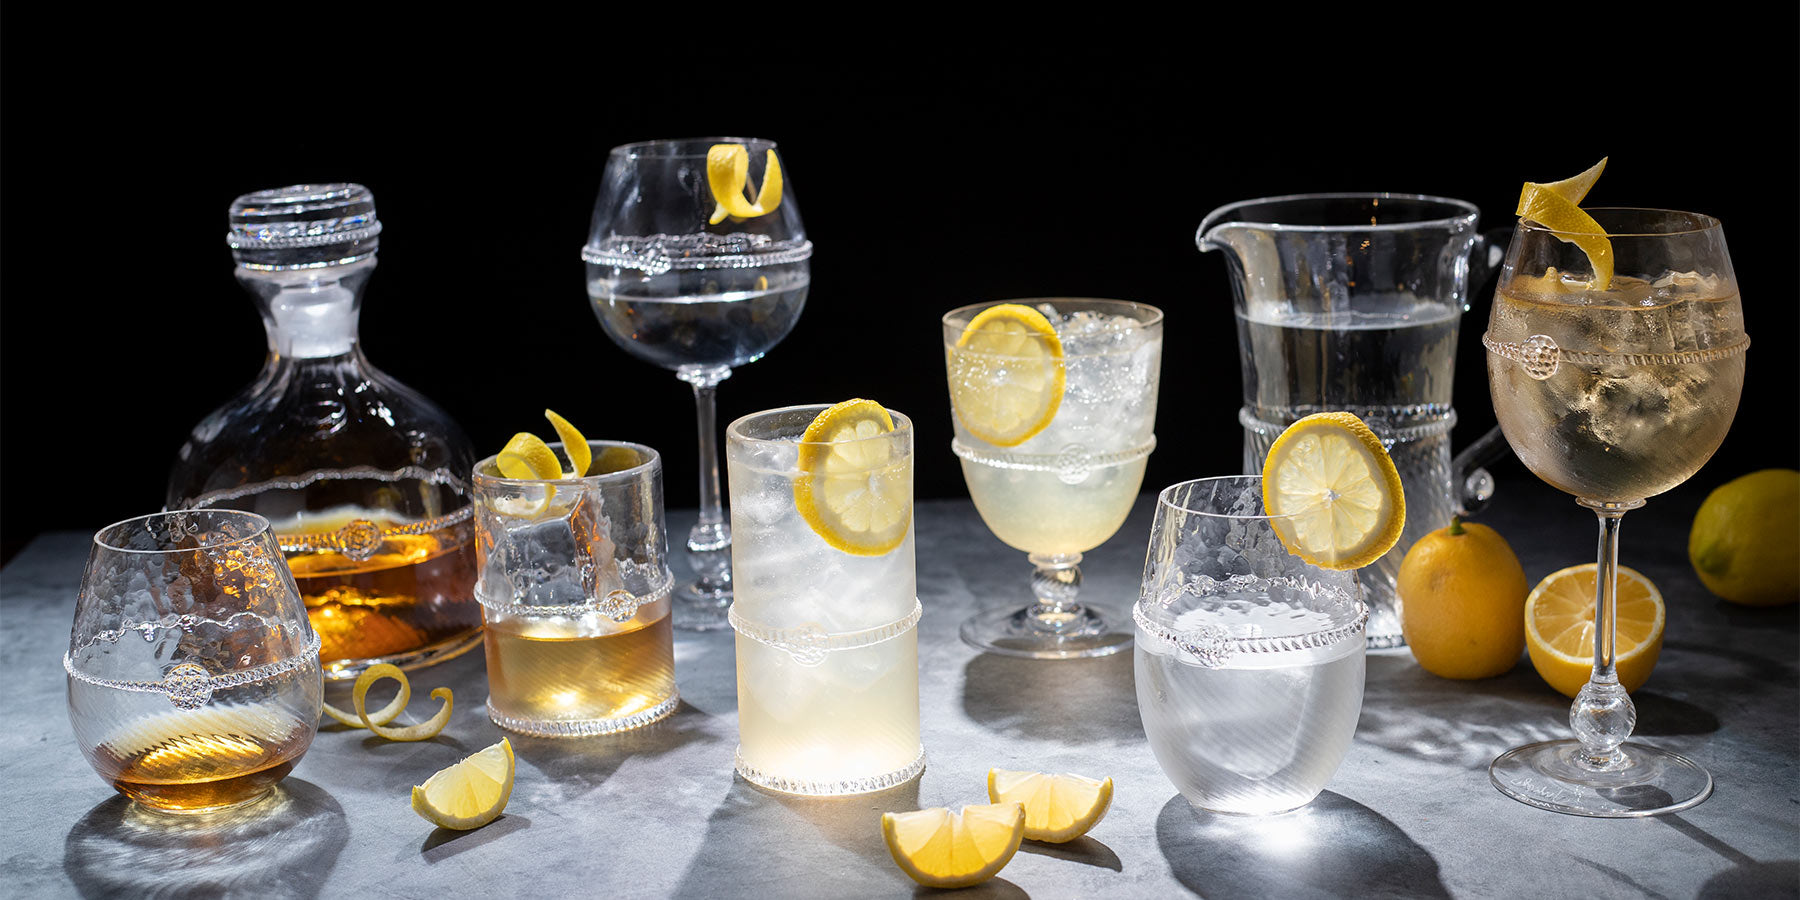 Second, select your drinkware. Whether stemmed or stemless, you want your wine and water glasses to complement and harmonize with your dinnerware because your placesettings are the most vital pieces on the table, with the most visual impact.